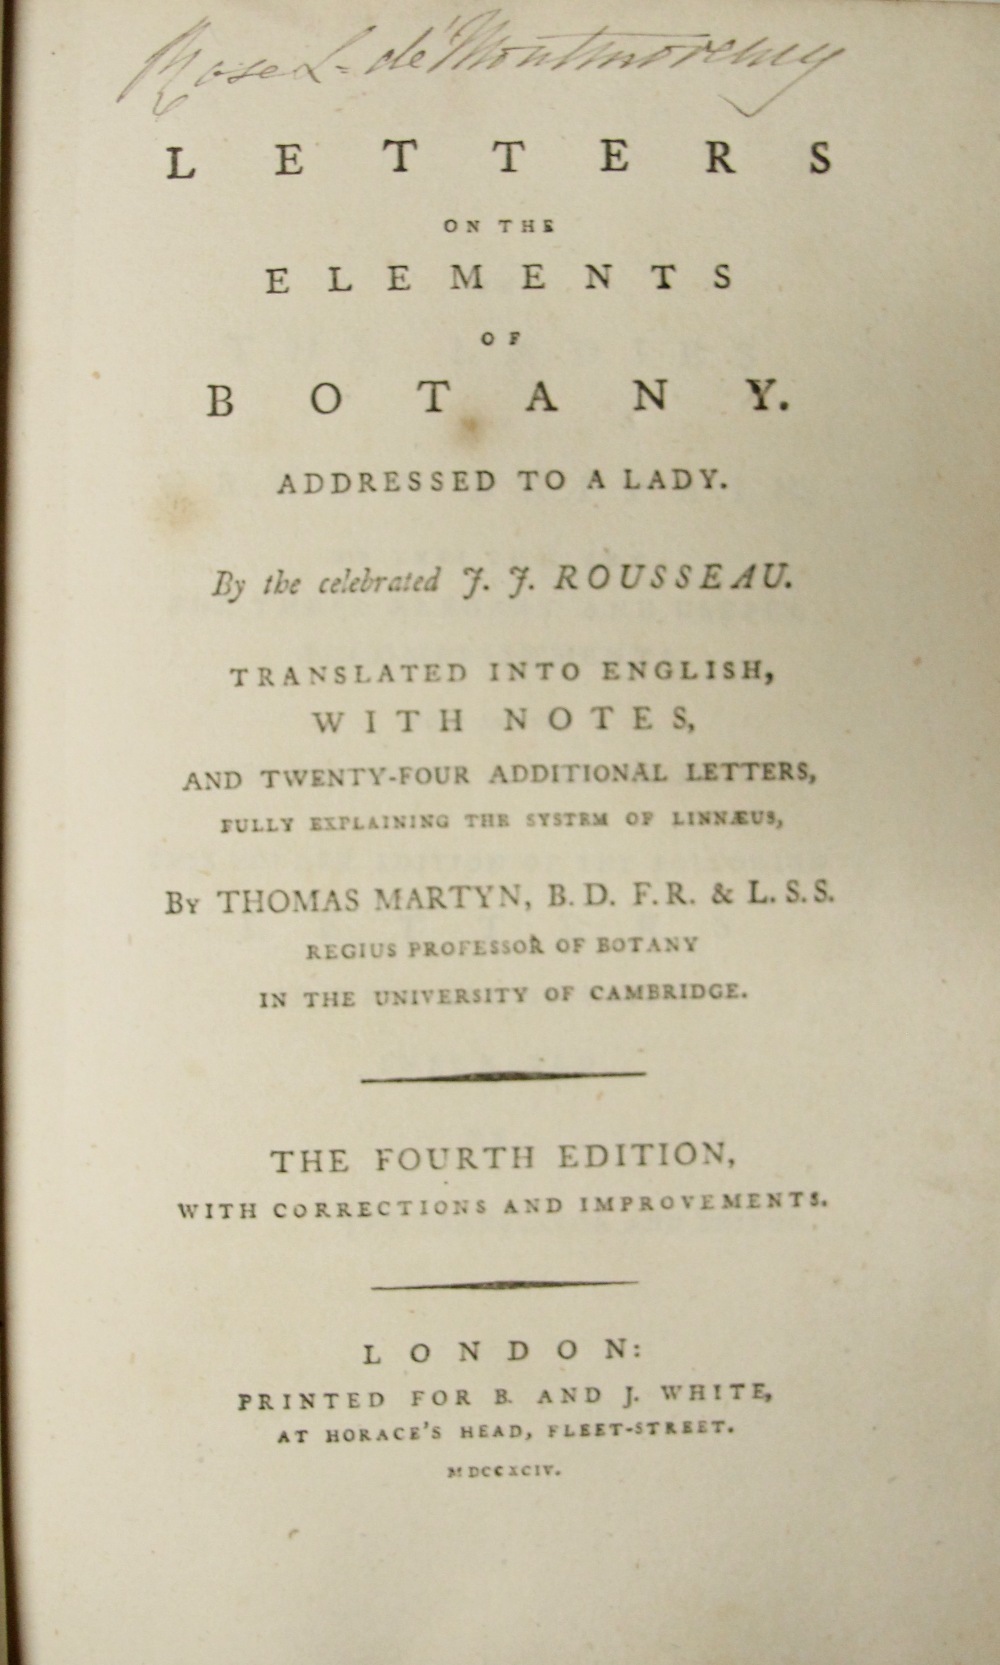 Martyn (Thos.)ed. Letters on the Elements of Botany, addressed to a Lady by the Celebrated J.J.